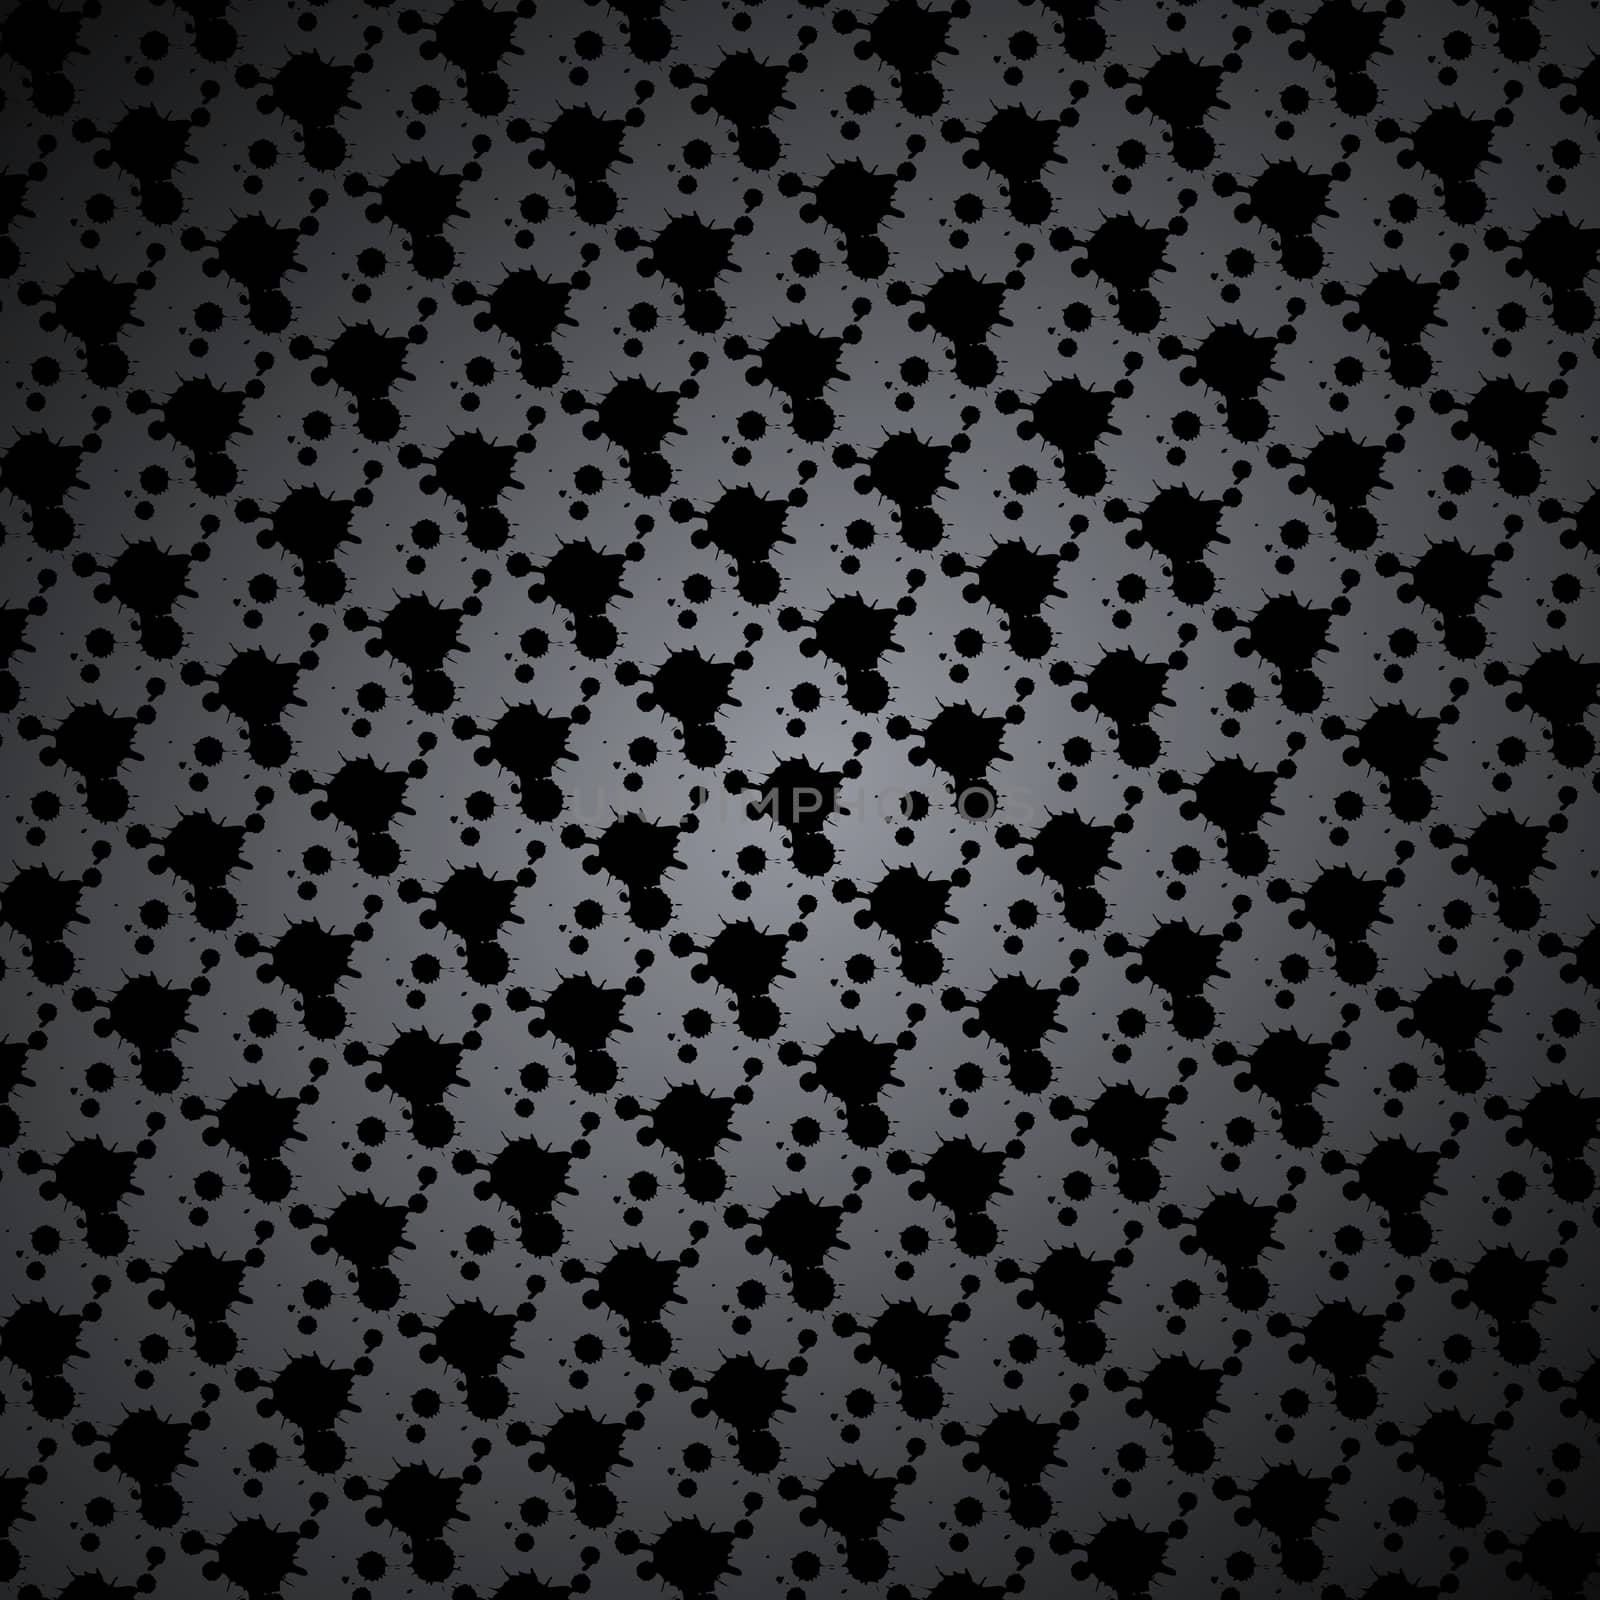 Abstract metal background. For your commercial and editorial use.